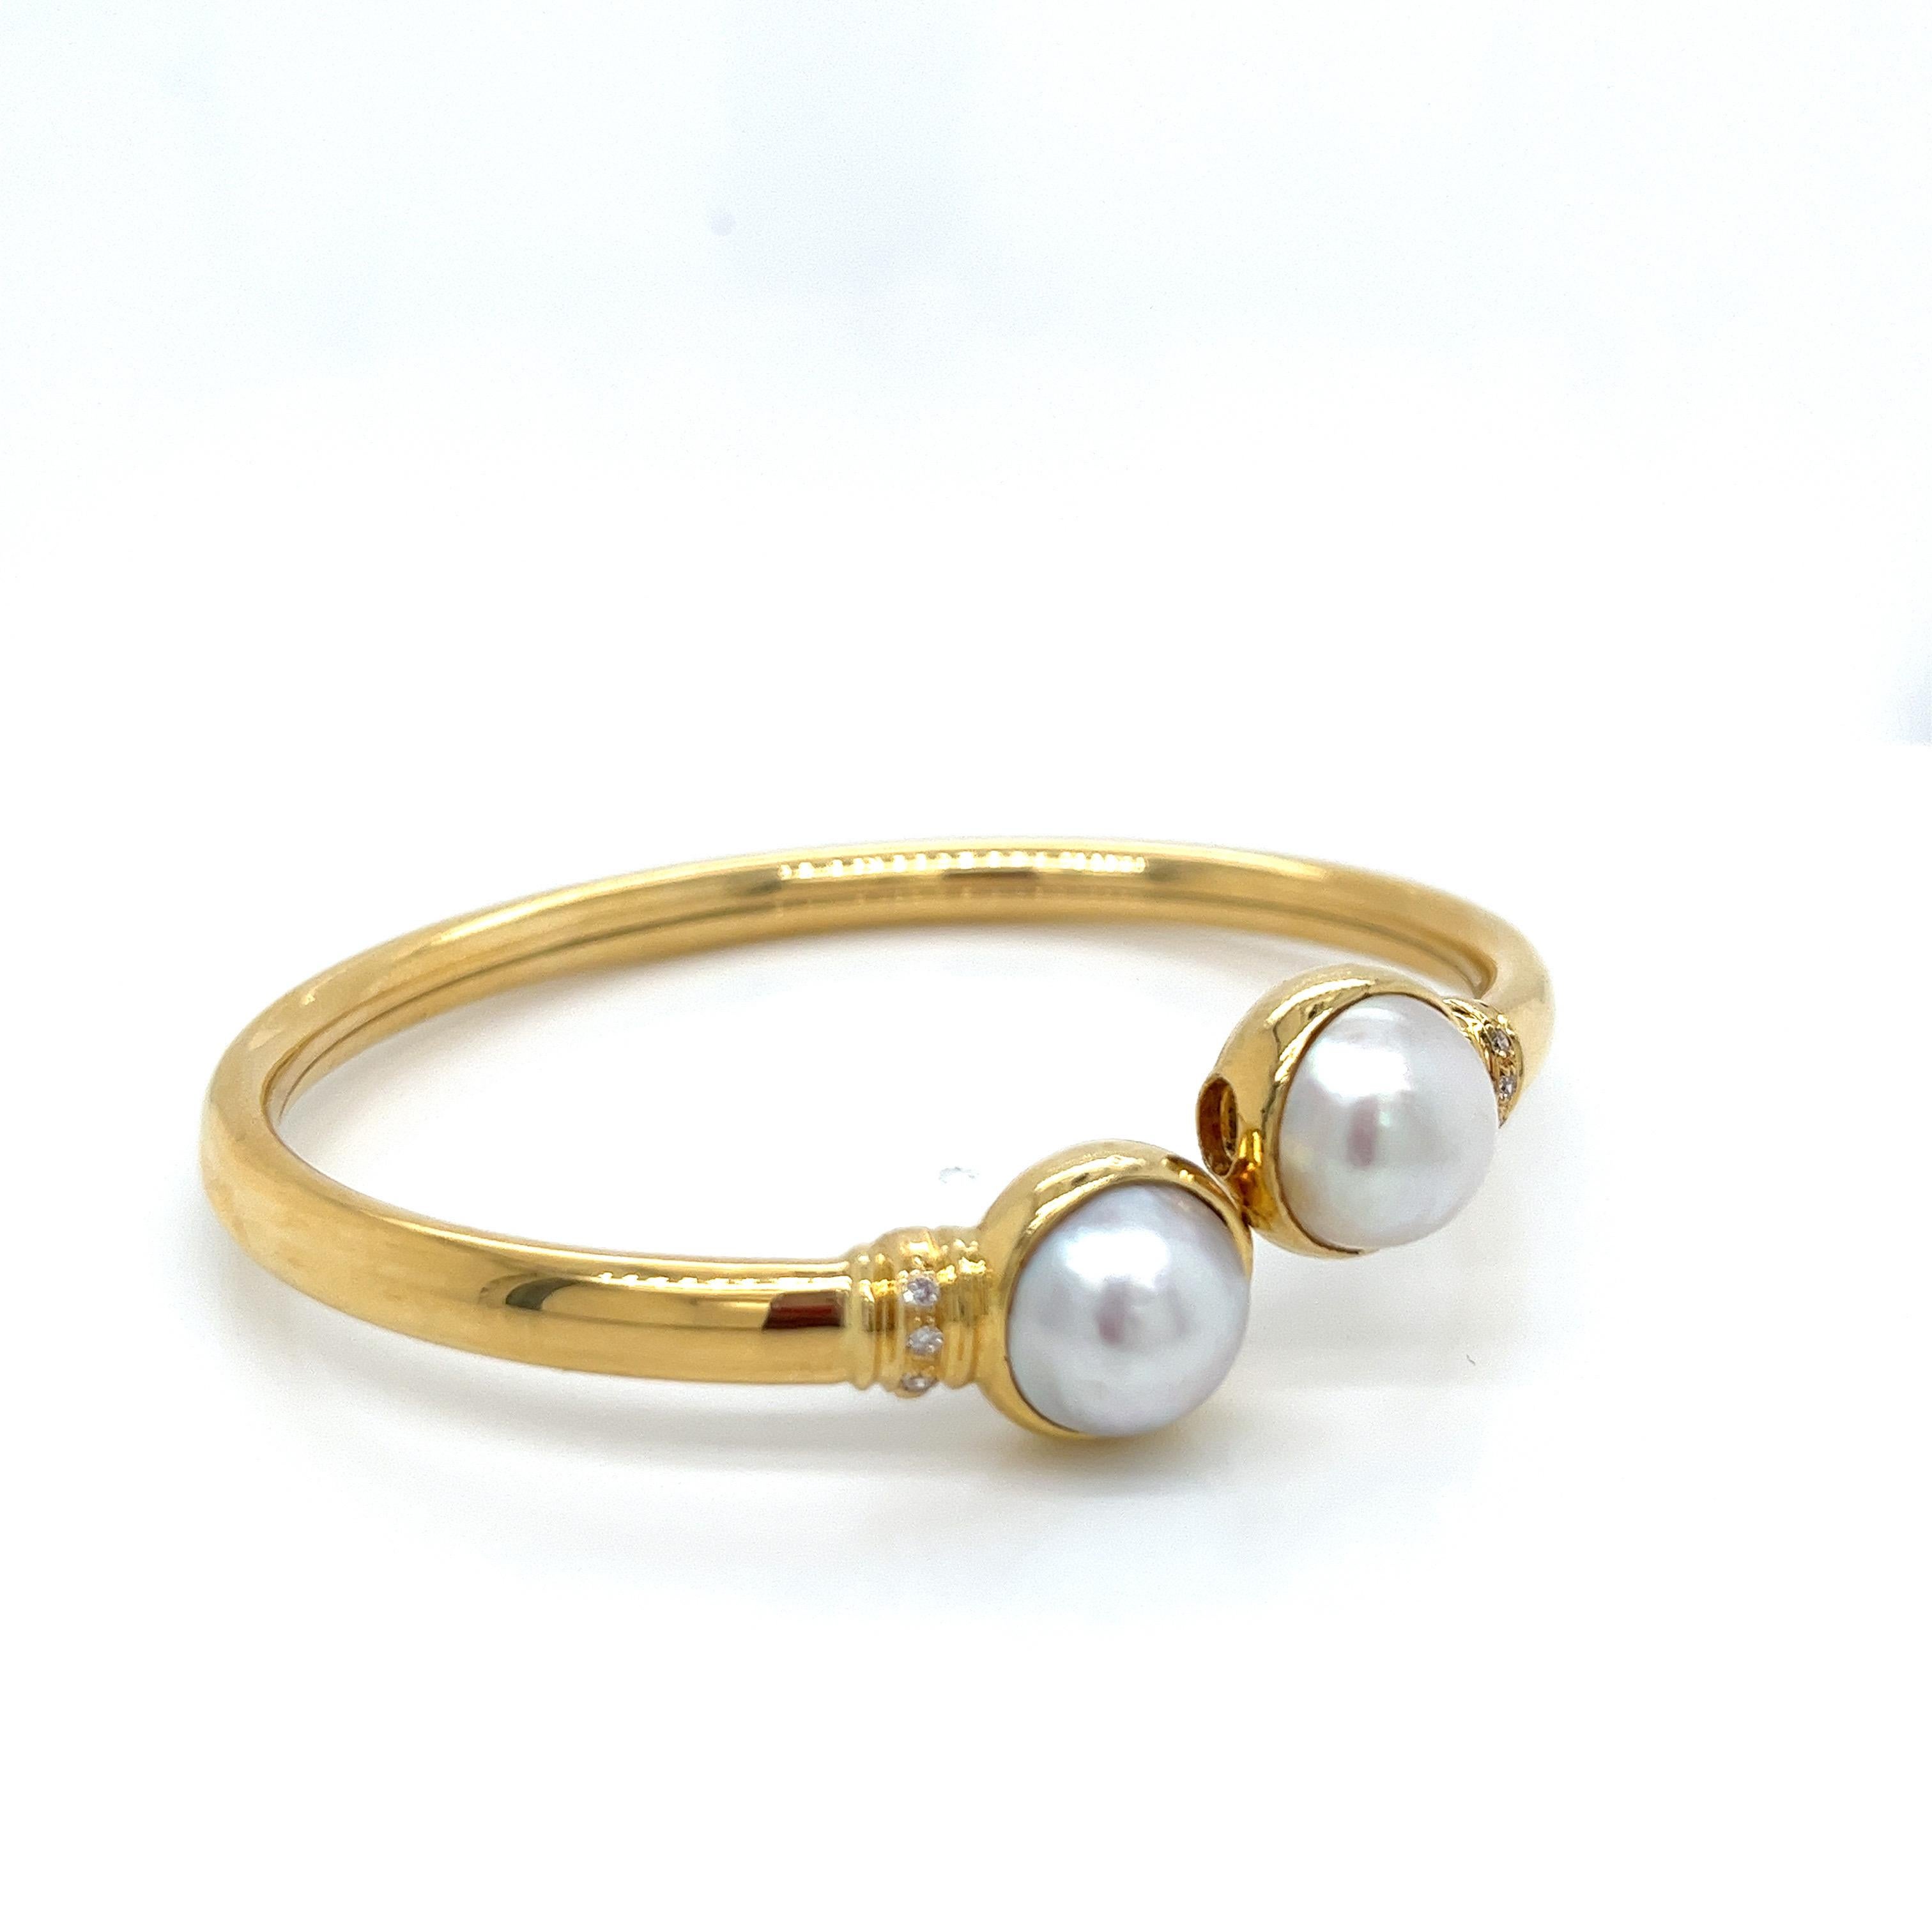 Vintage 18k Yellow Gold Mabe Pearl and Diamond Bangle Bracelet In Good Condition For Sale In Boston, MA